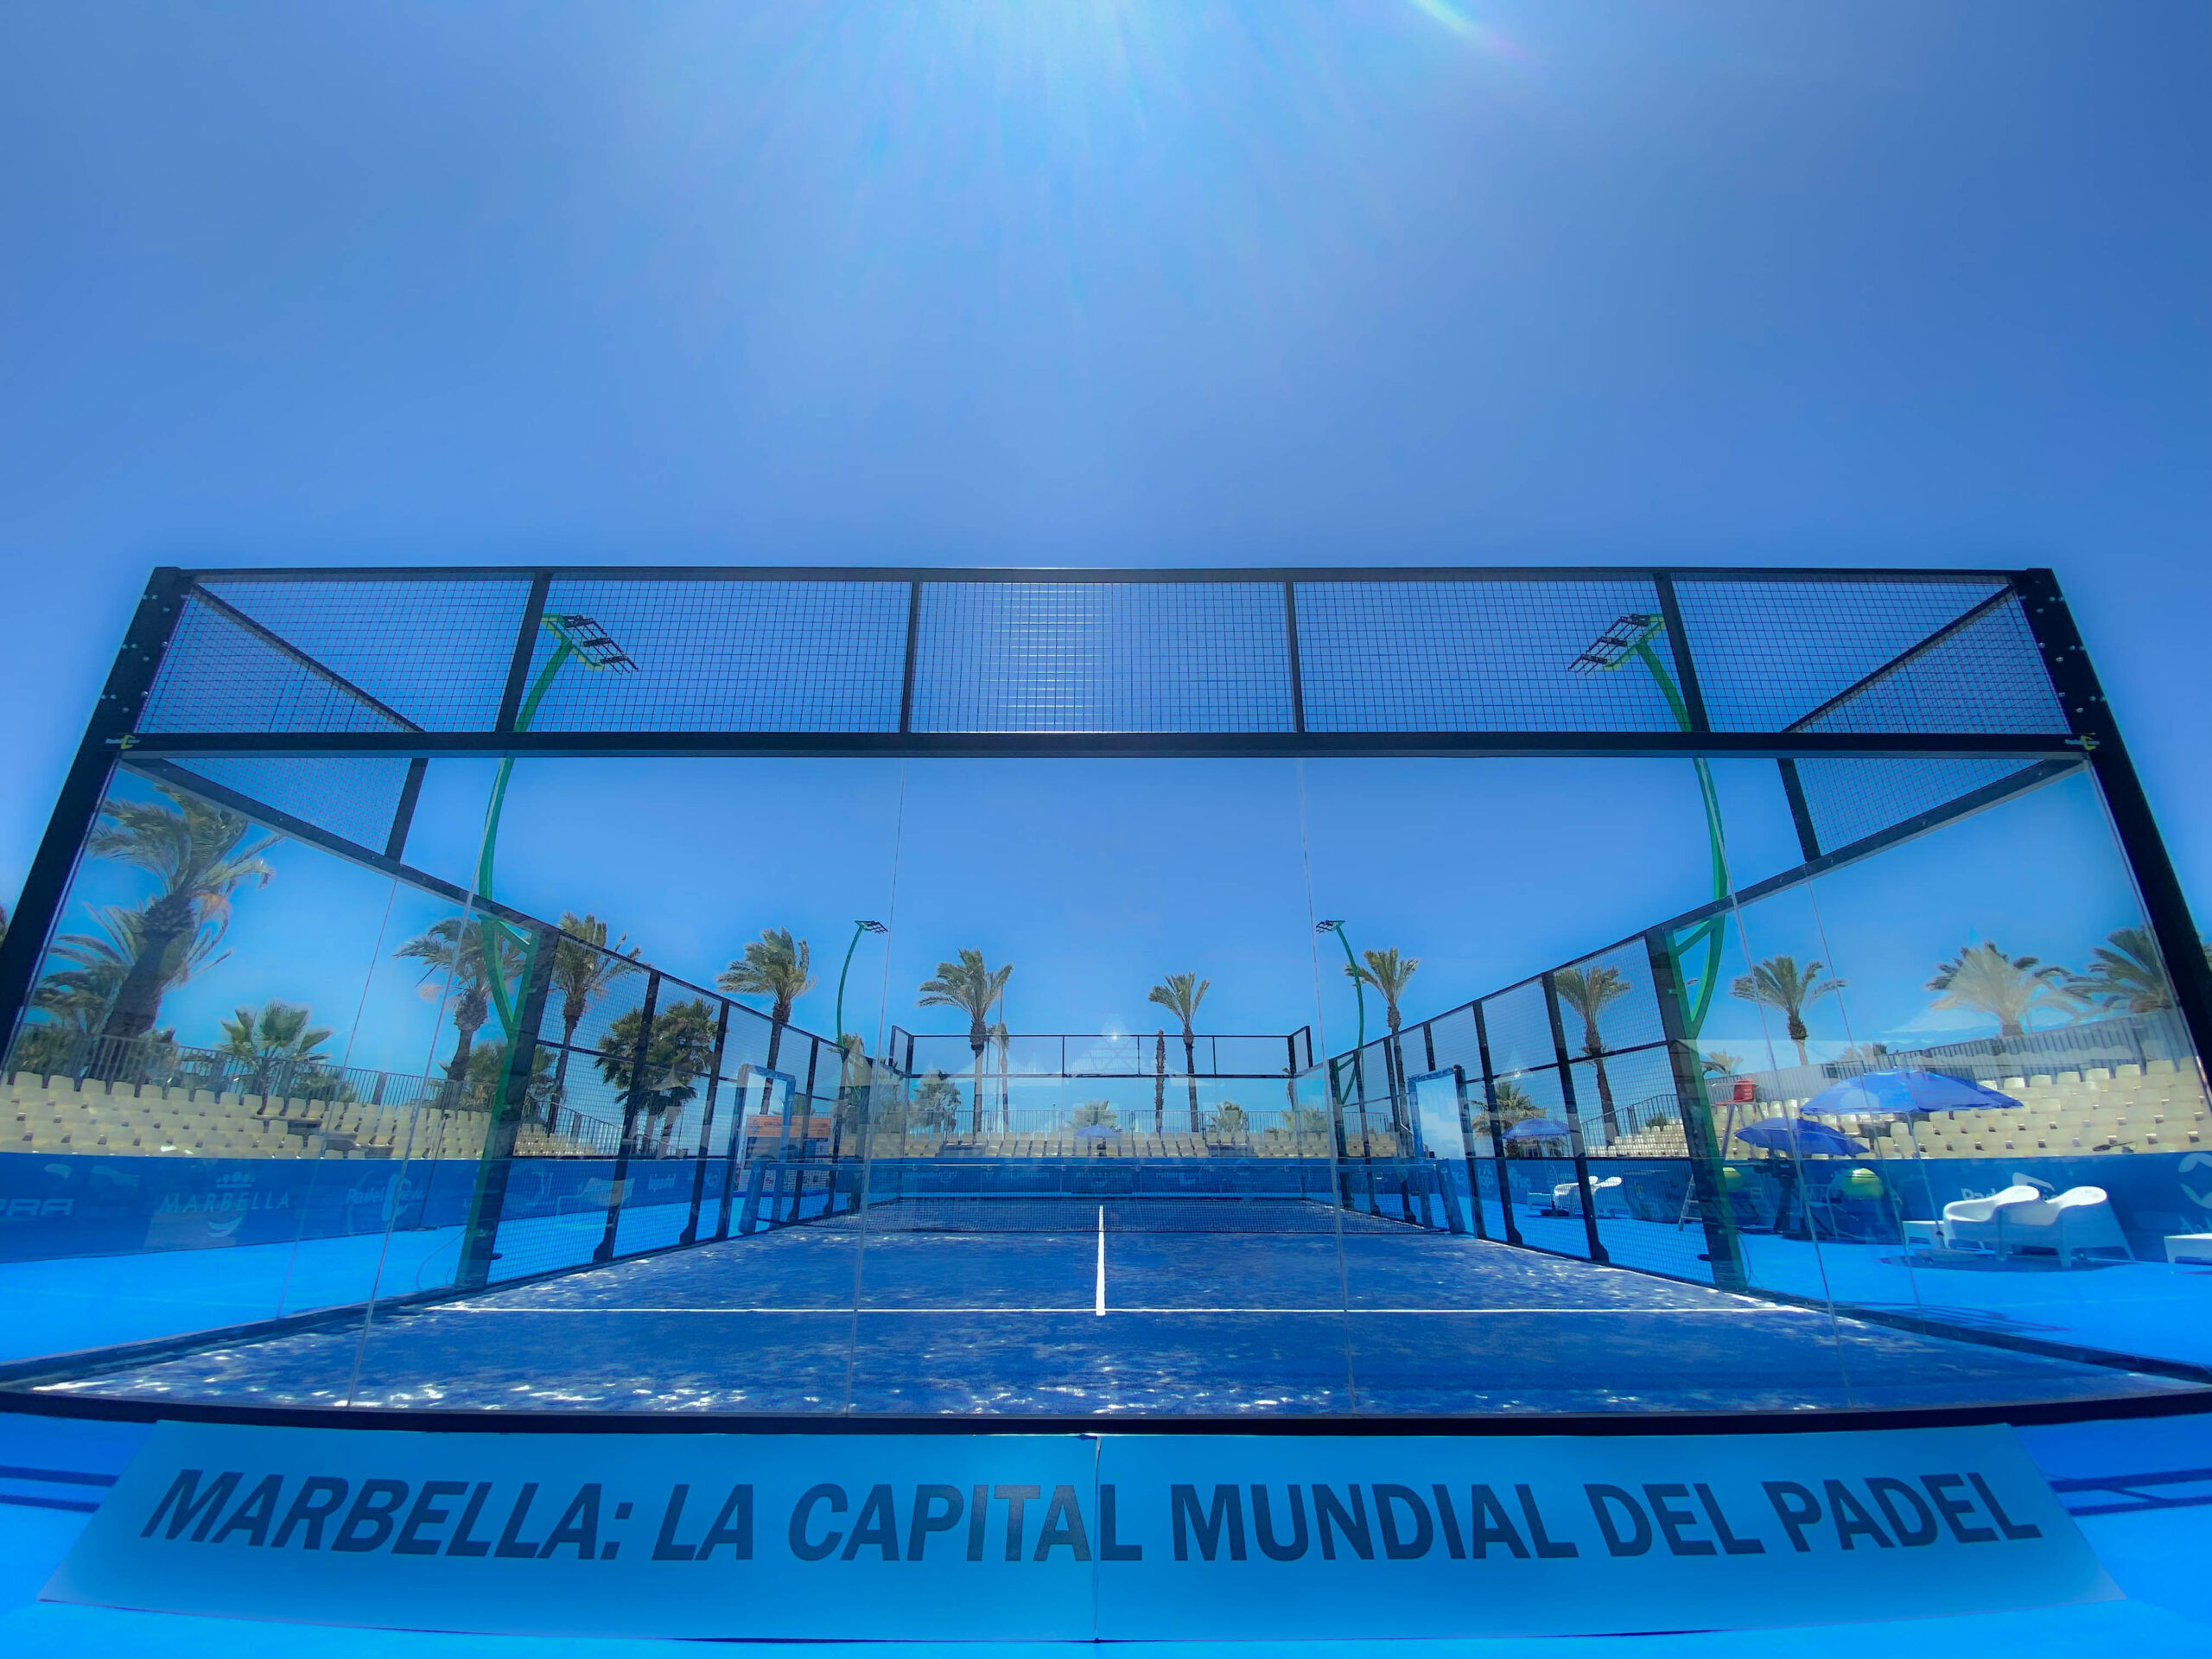 The Spanish Federation Padel did not organize Euro 2021